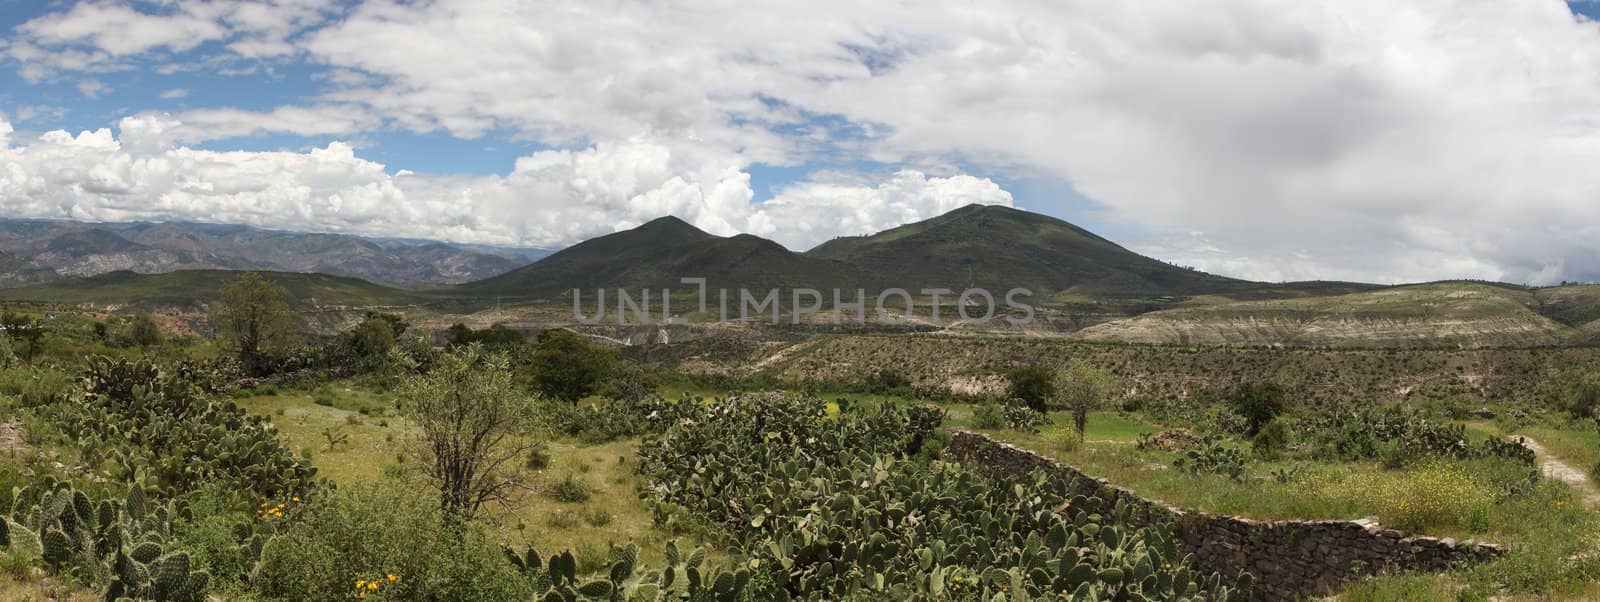 Panorama of countryside landscape and indigenous Wari wall in Peru. This photo is made attaching together various photos.
